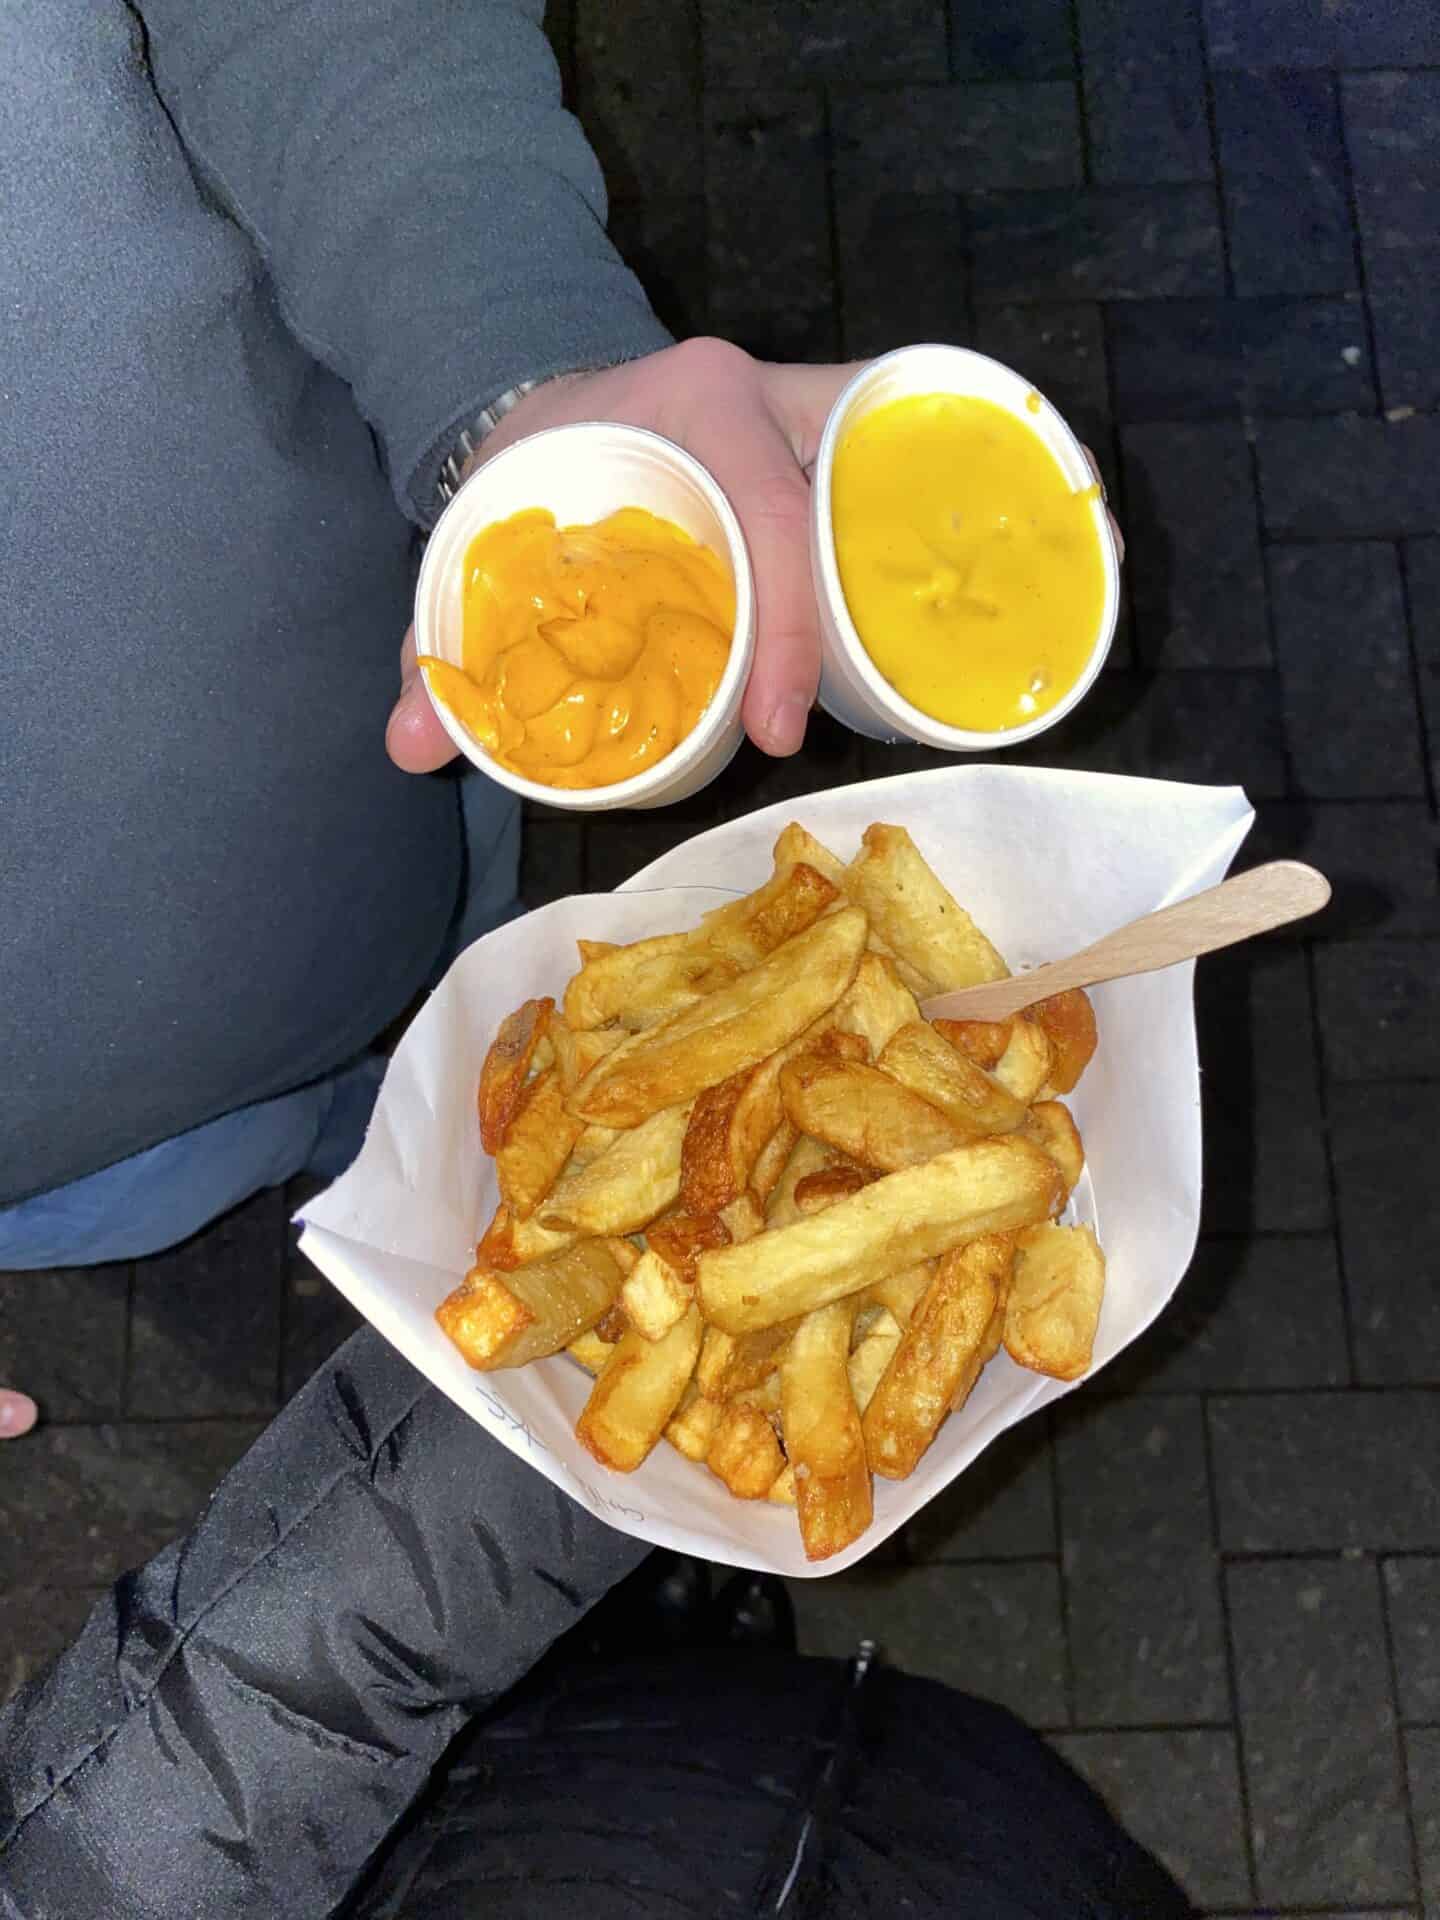 Cone of French fries with cheese and mustard